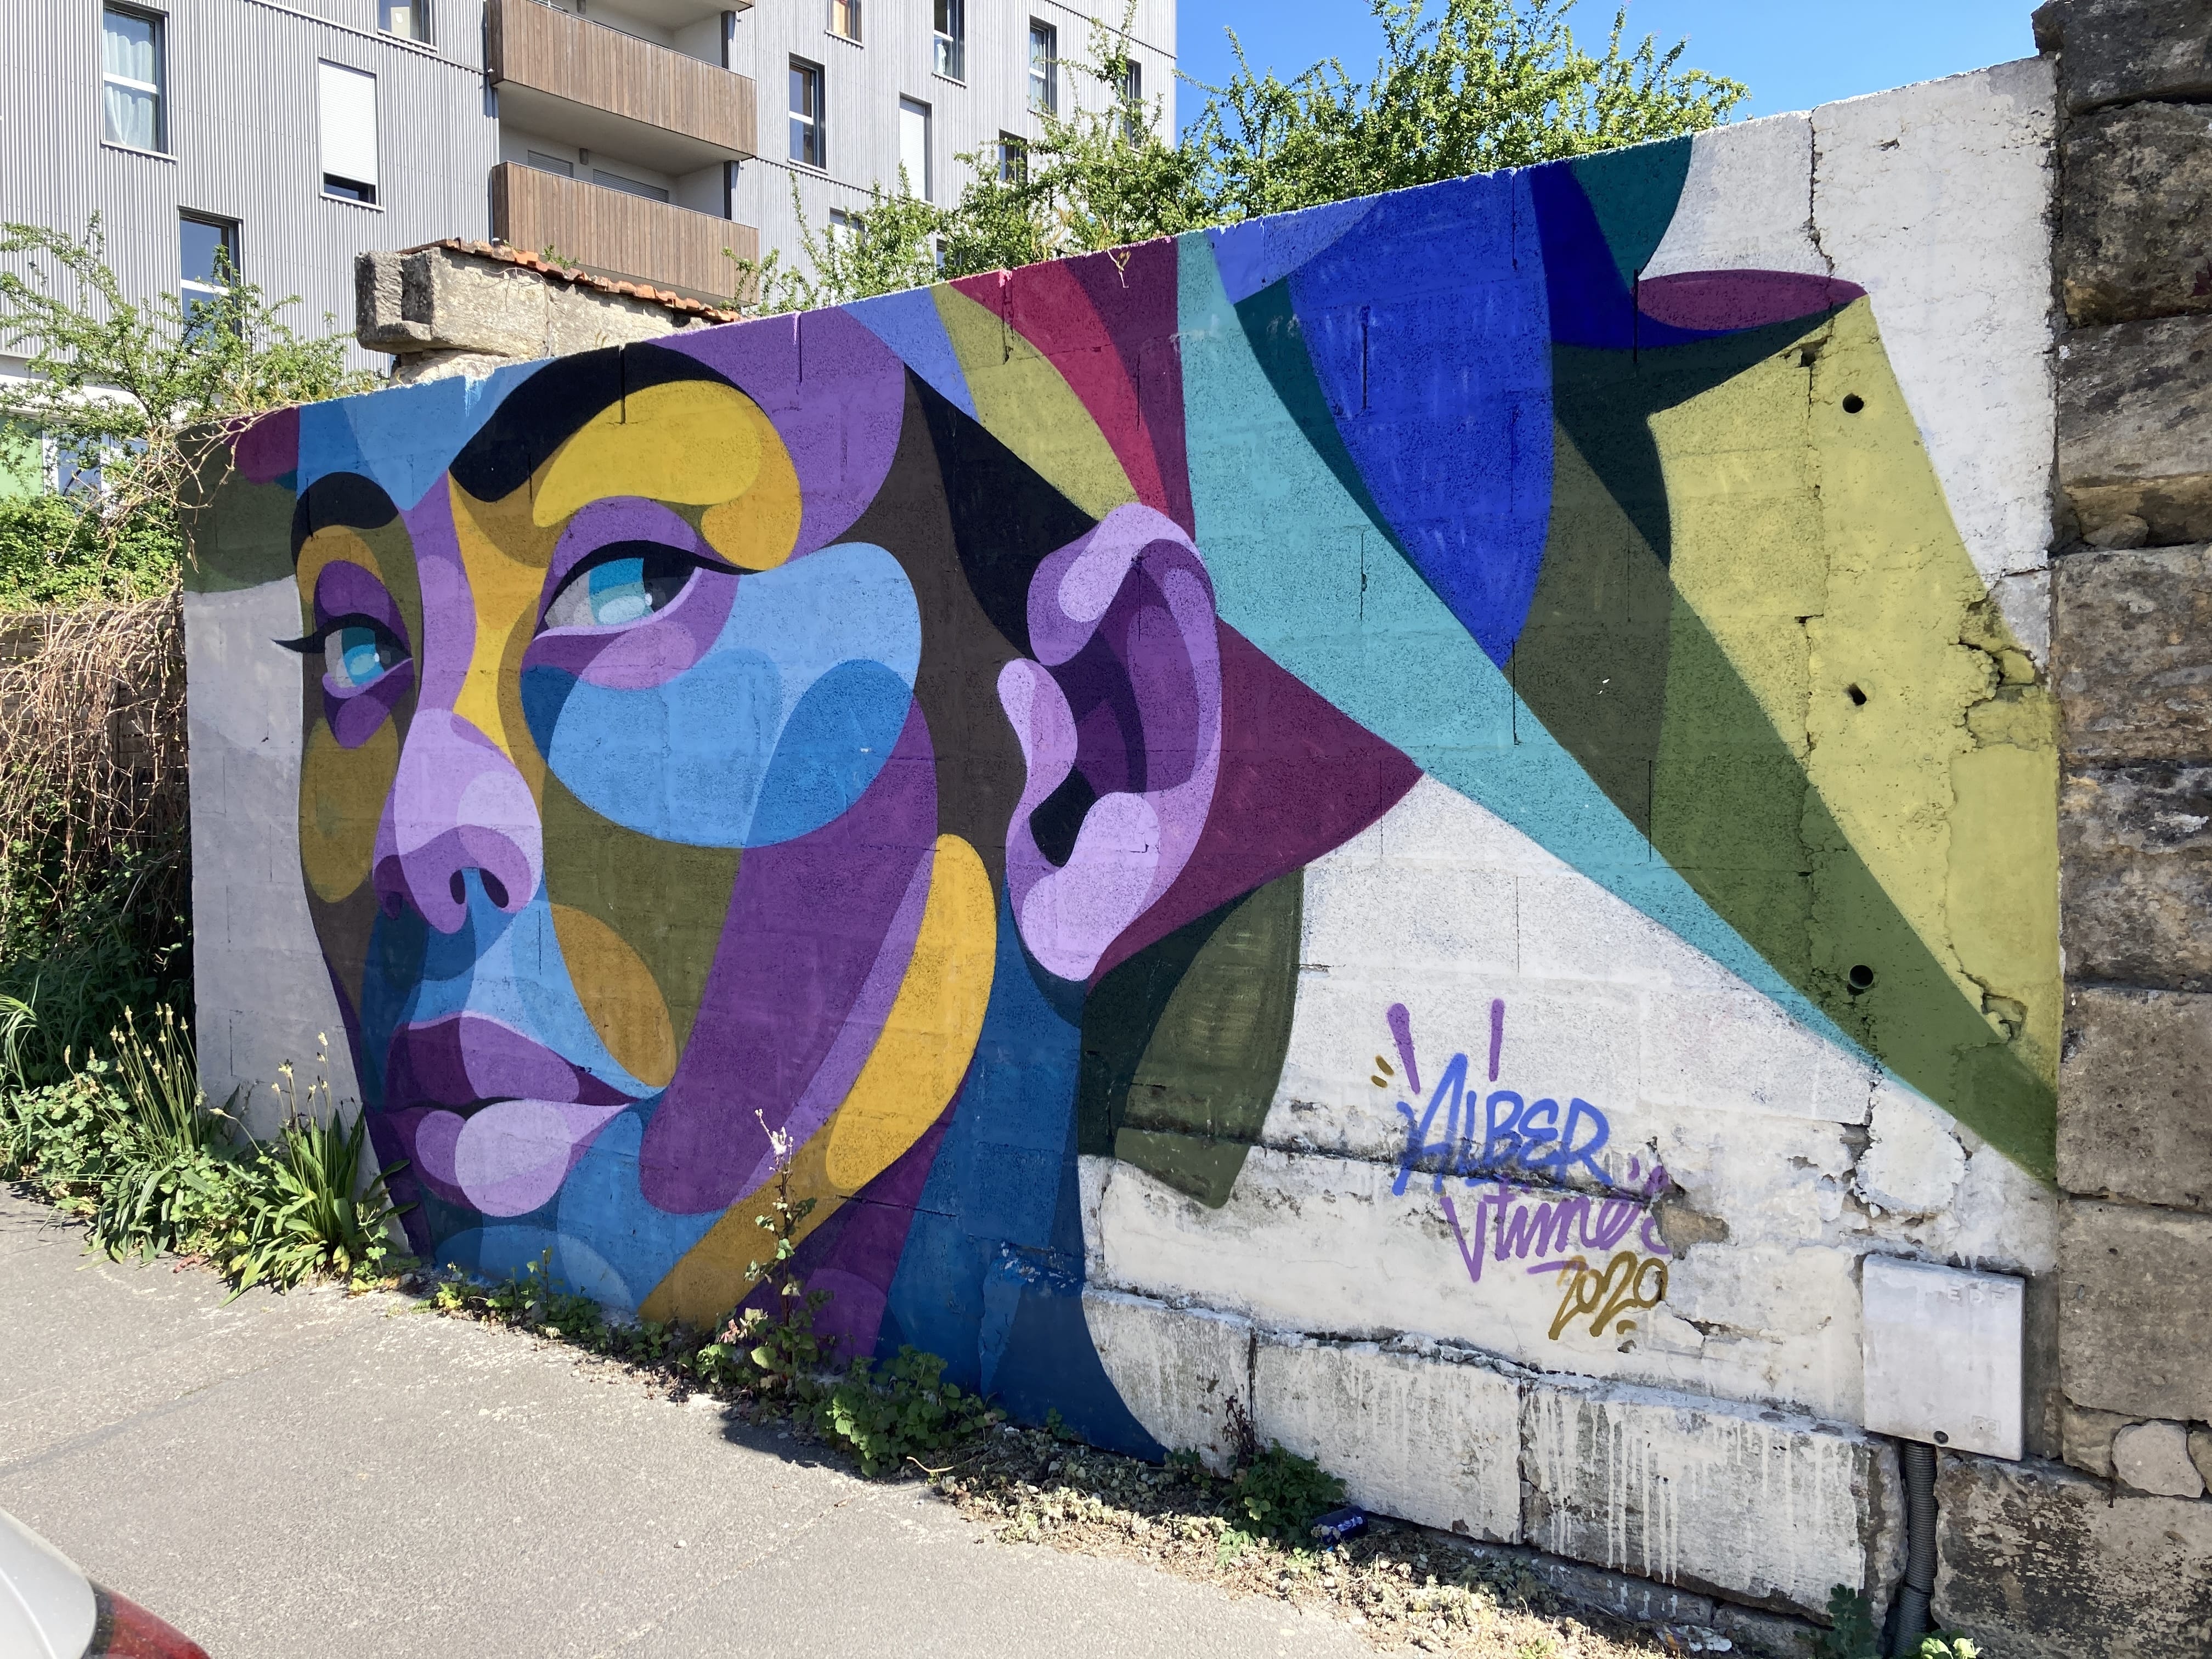 Graffiti 6303  by the artist Alber captured by Mephisroth in Bordeaux France